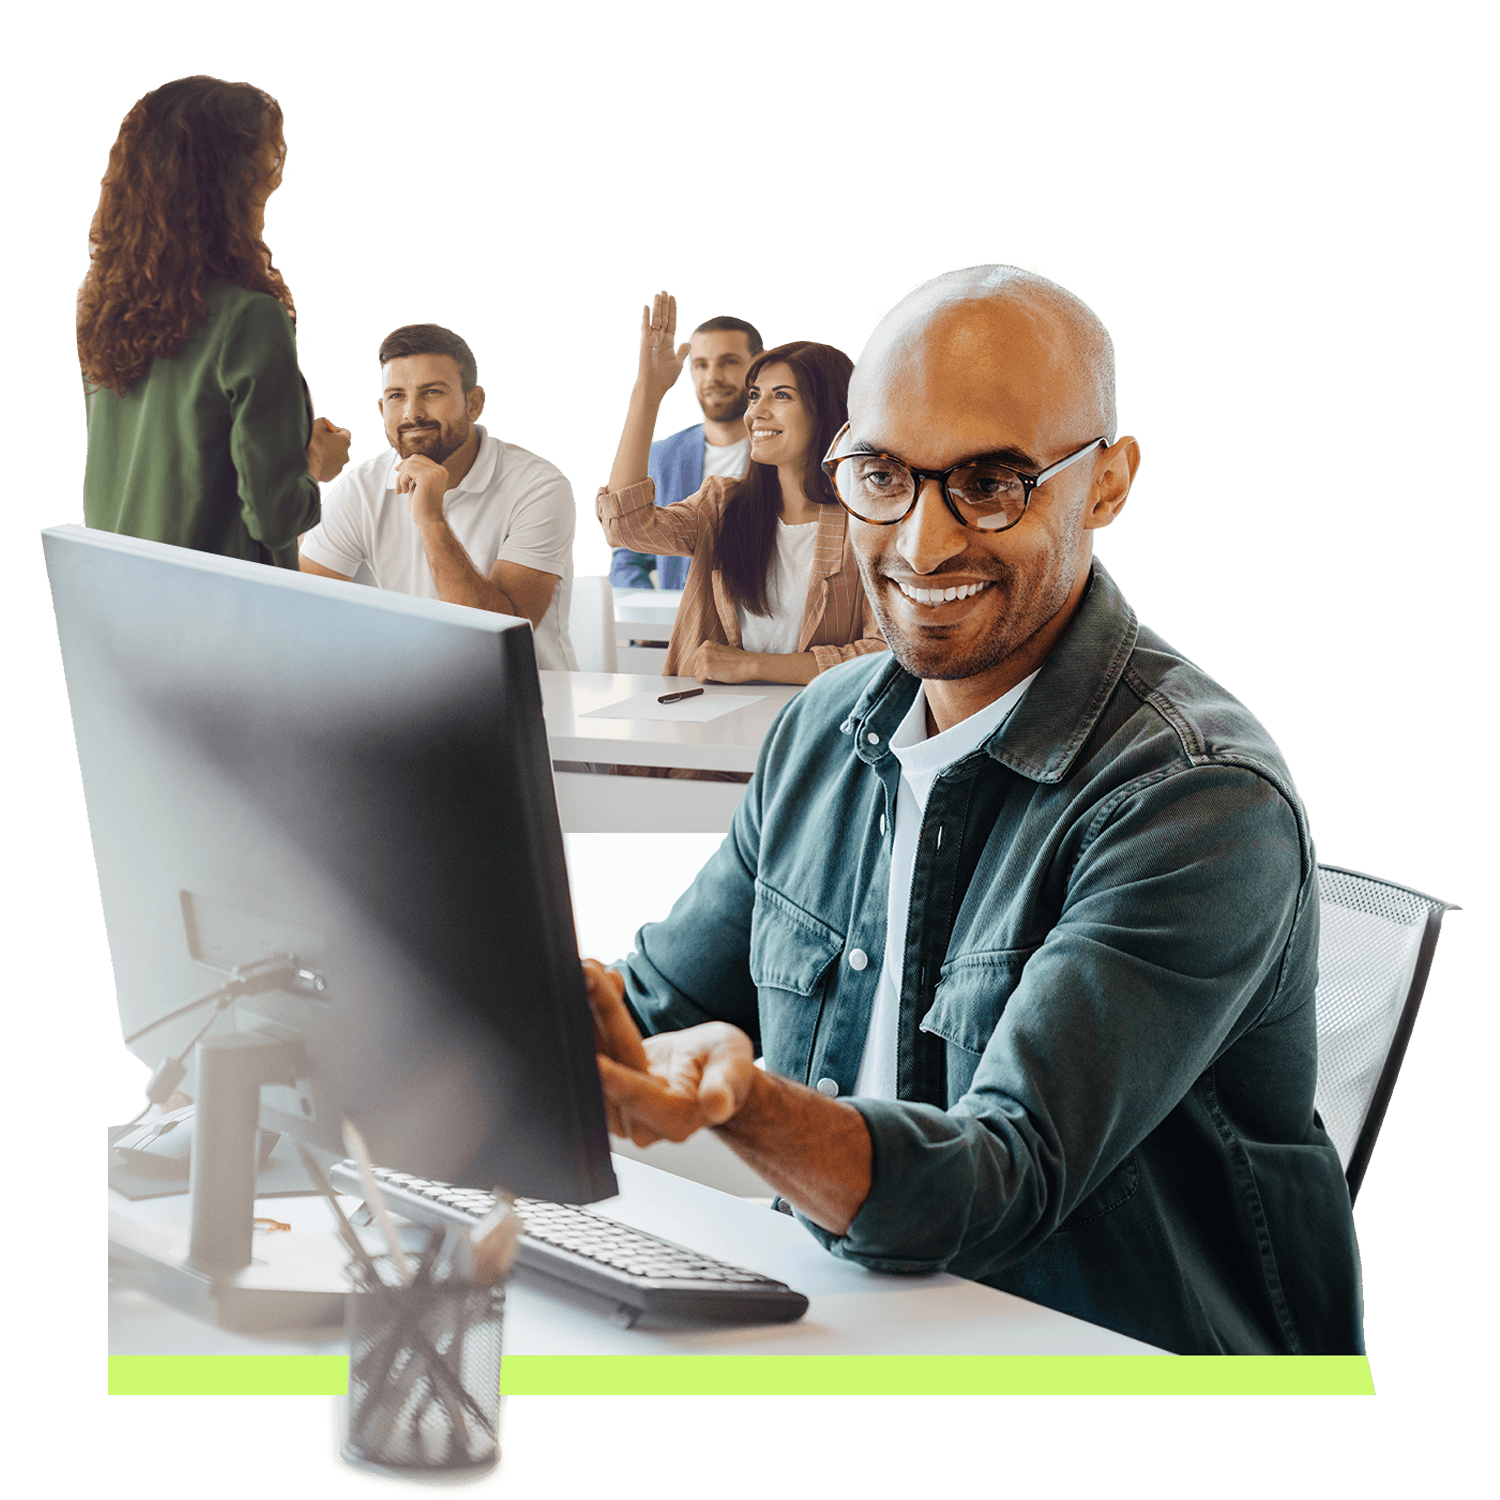 Professional Development Planner Web Image Workers in Office on Computer